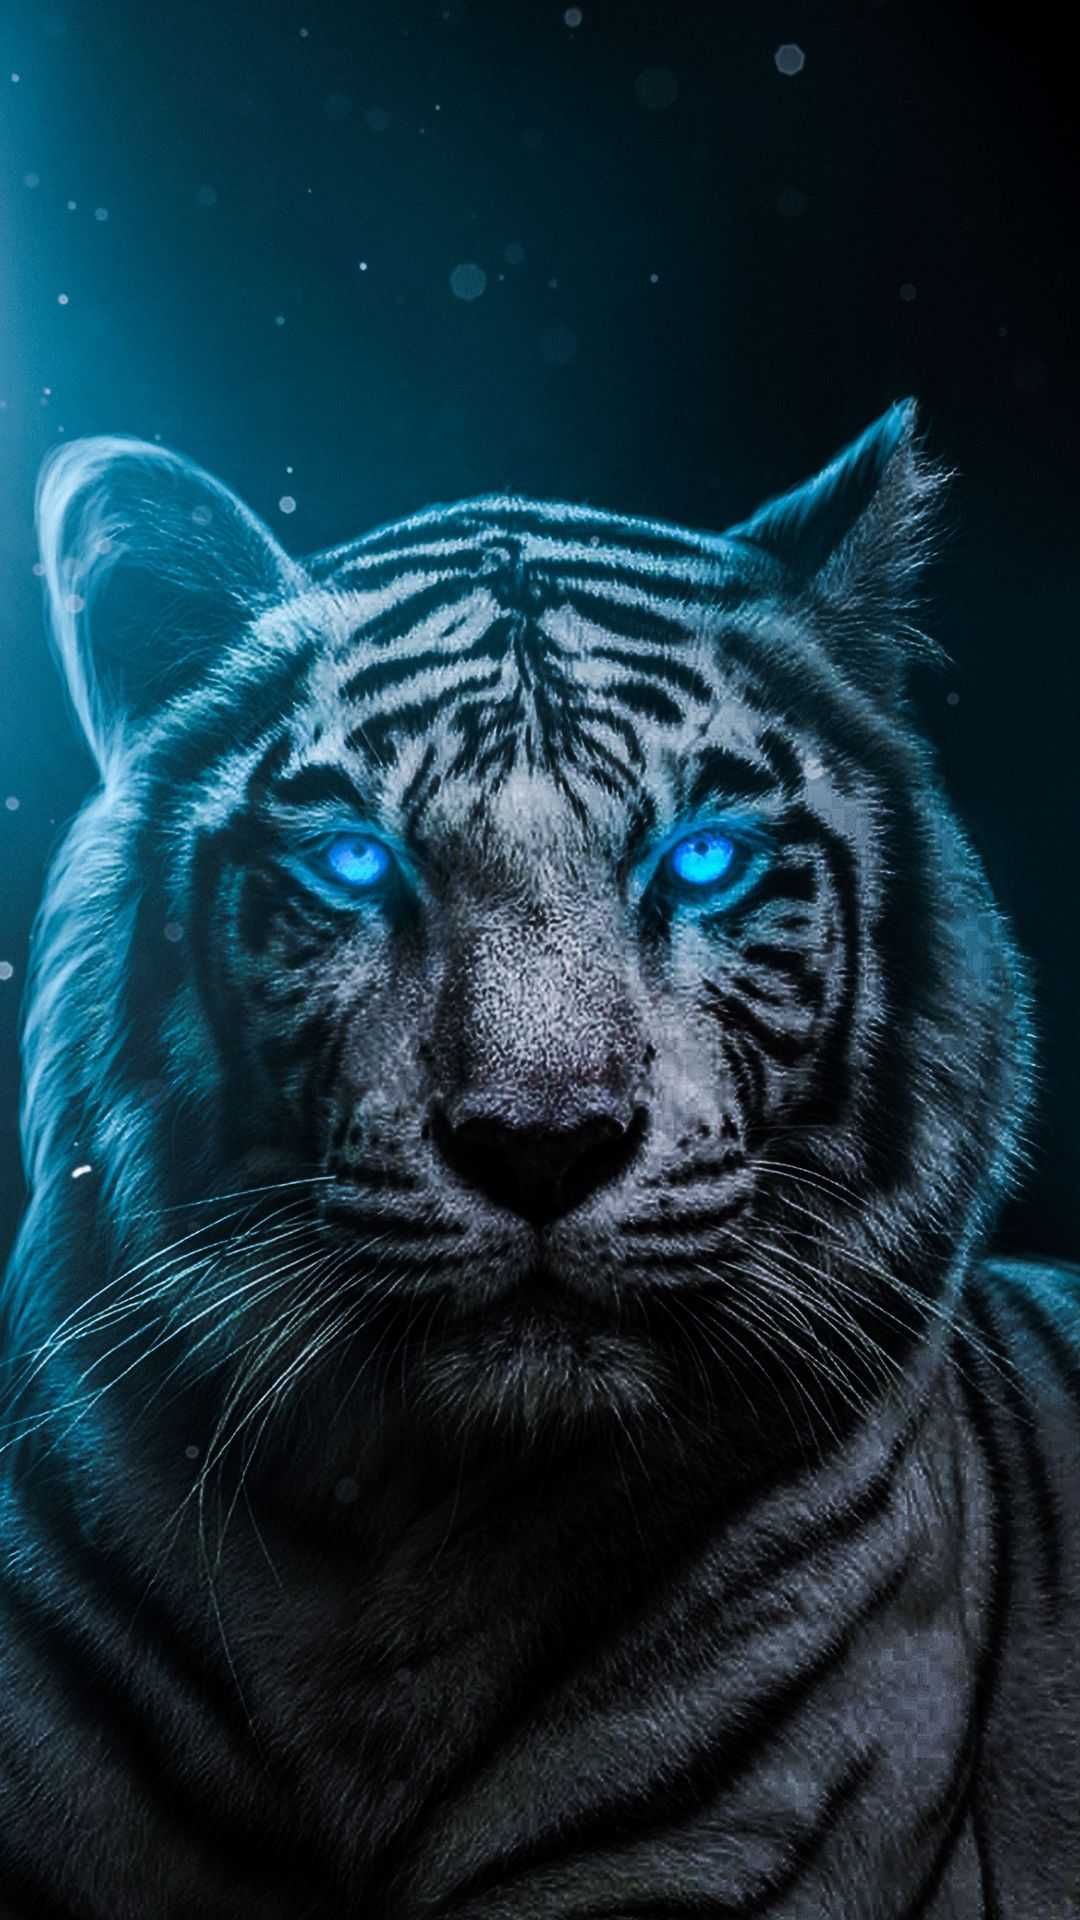 Cool TigersWallpapers